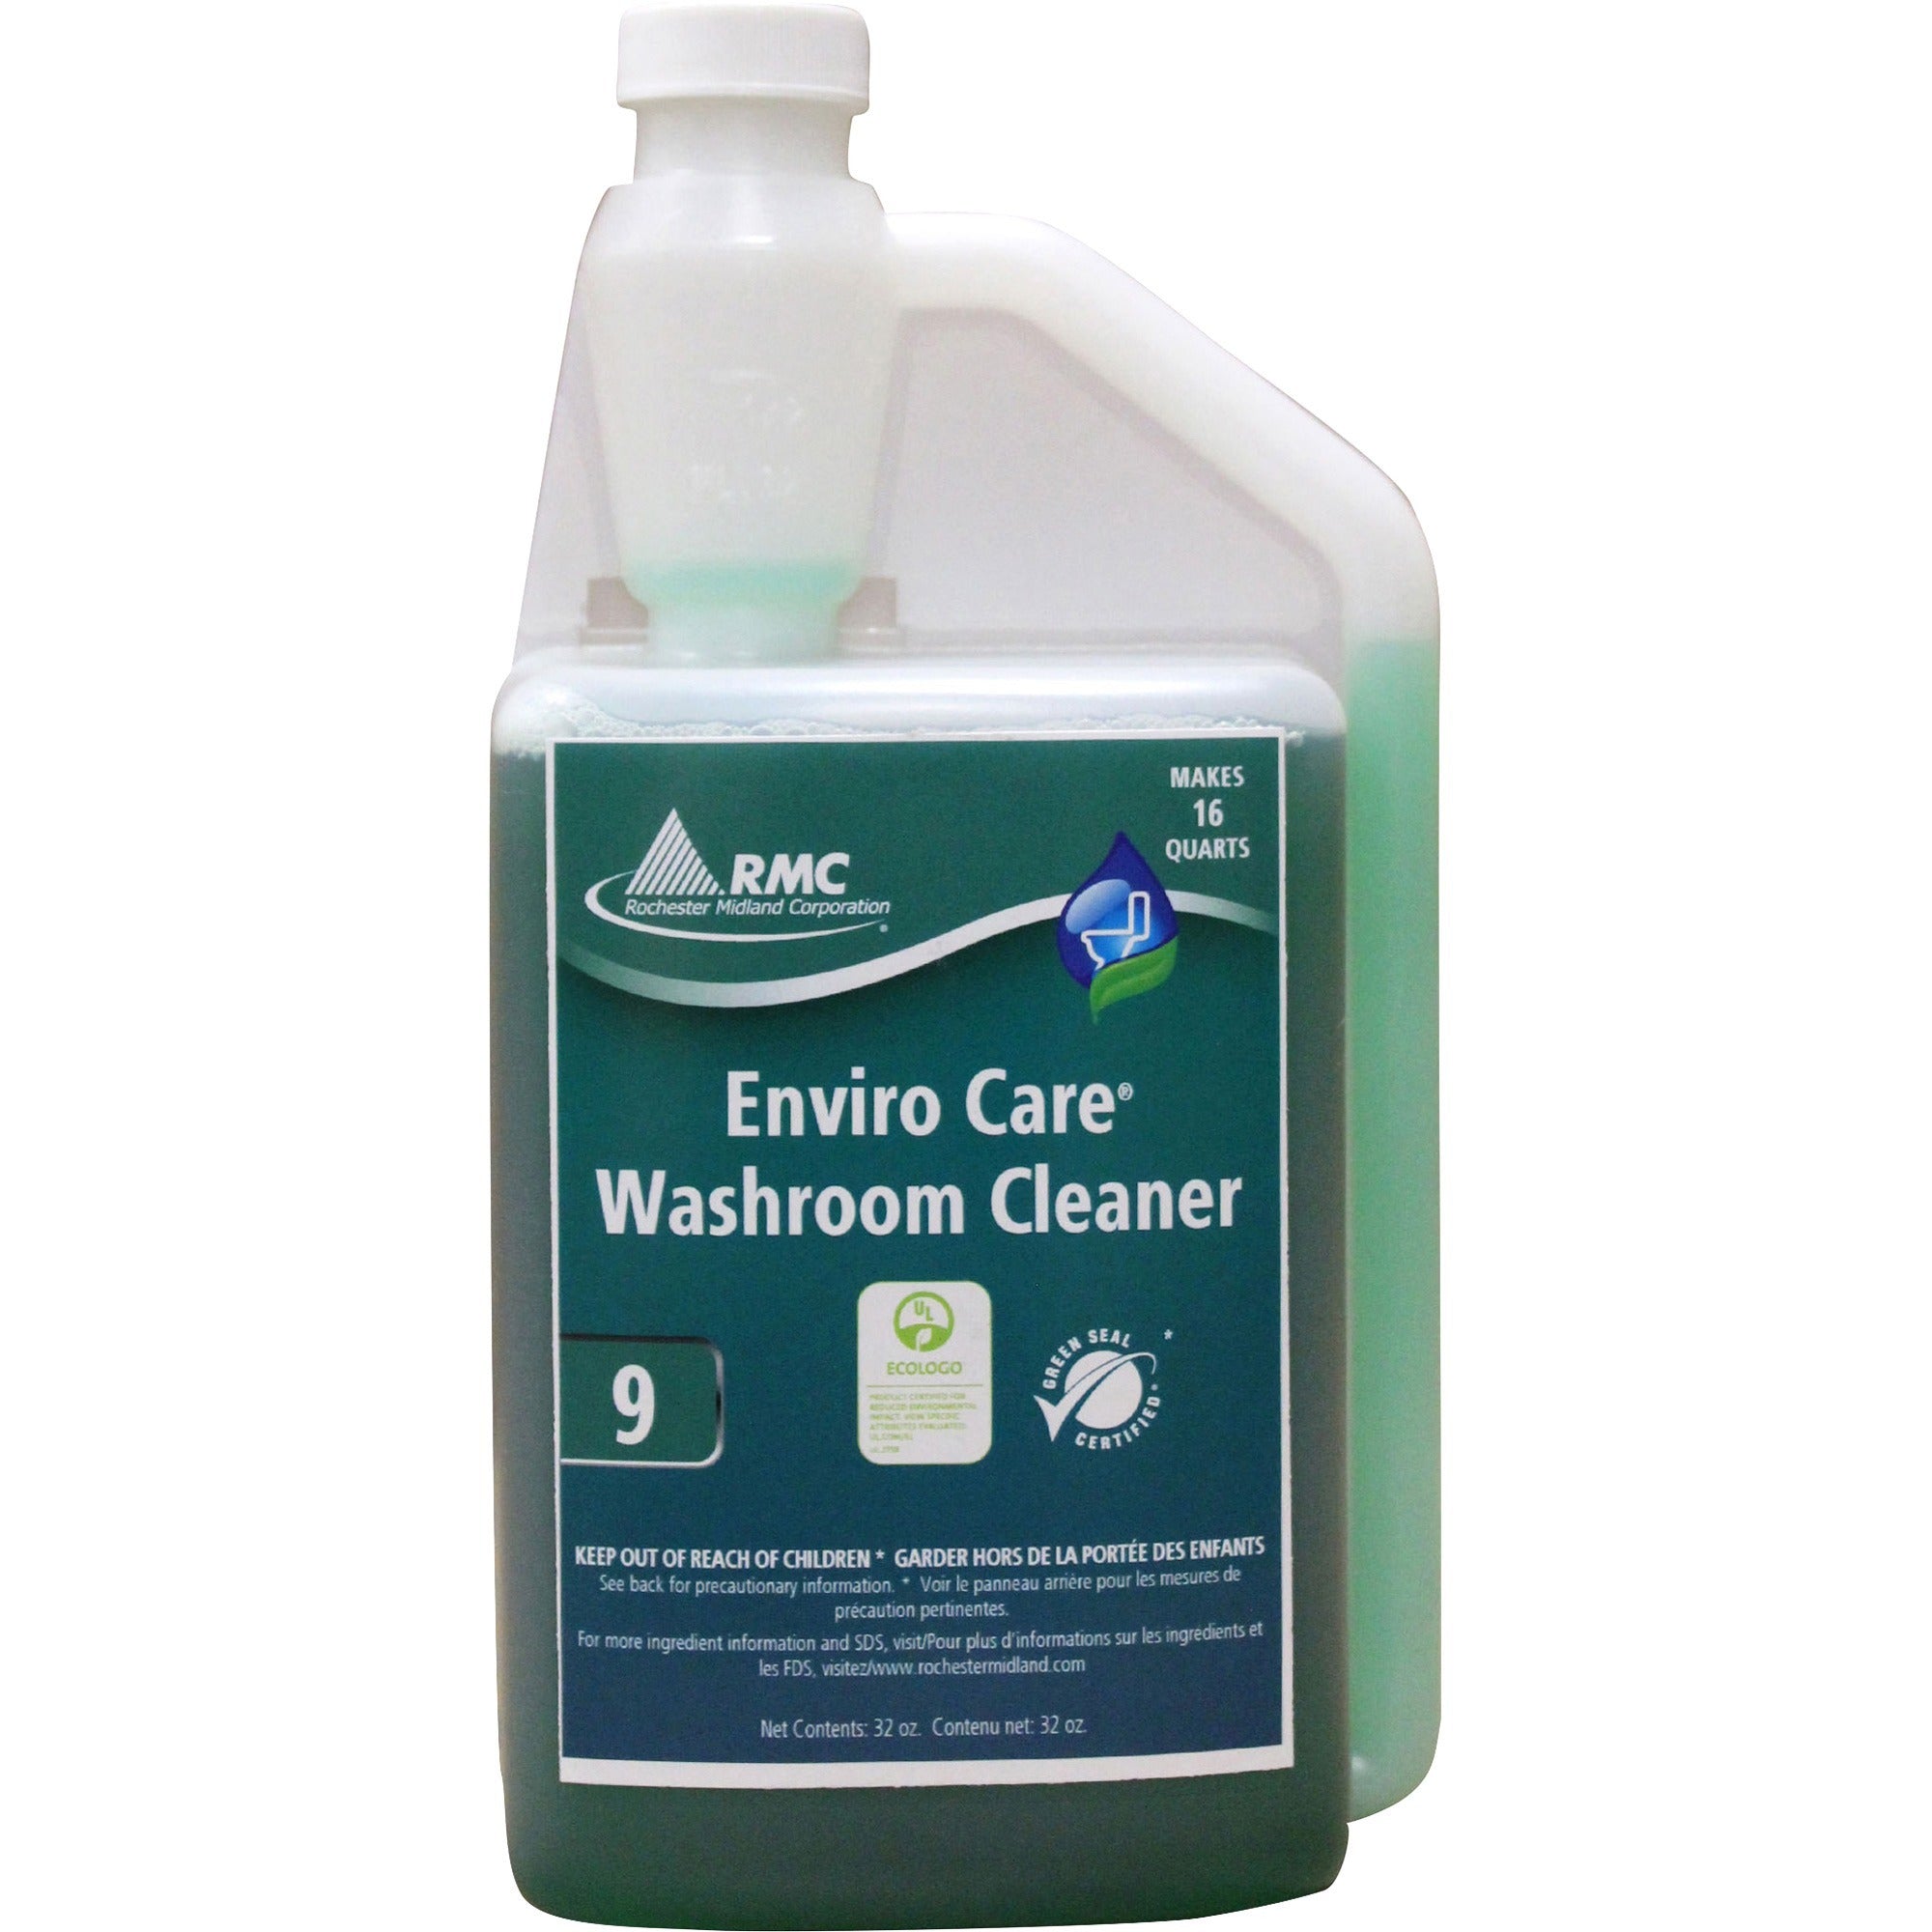 RMC Enviro Care Washroom Cleaner - Concentrate - 32 fl oz (1 quart) - 1 Each - Bio-based, Phosphate-free, Non-toxic - Blue, Green - 